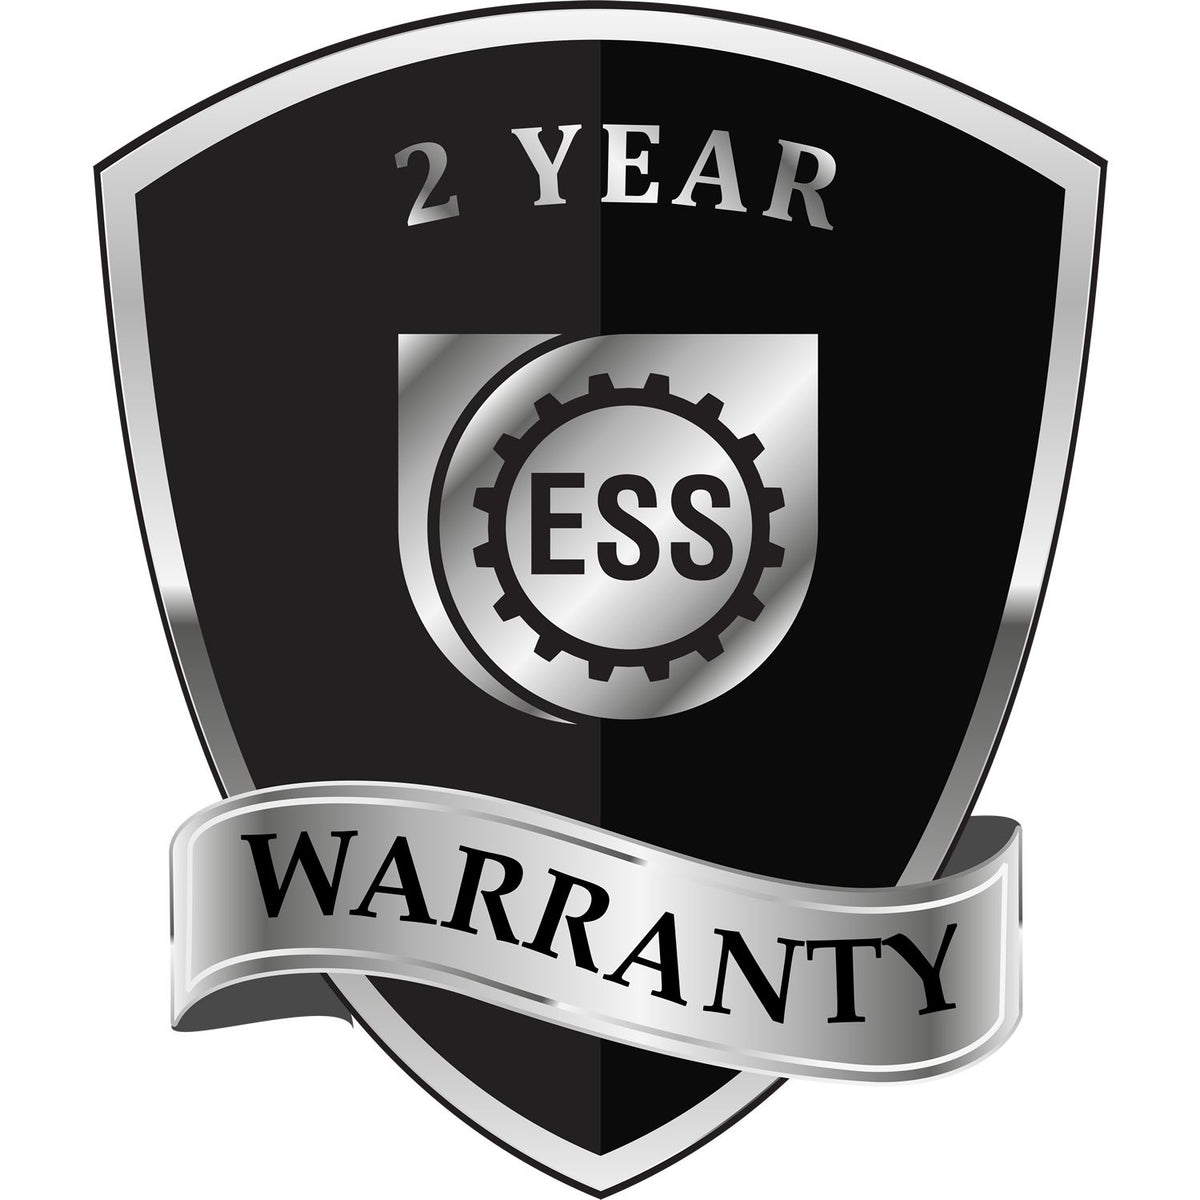 A badge or emblem showing a warranty icon for the Extended Long Reach Alabama Surveyor Embosser